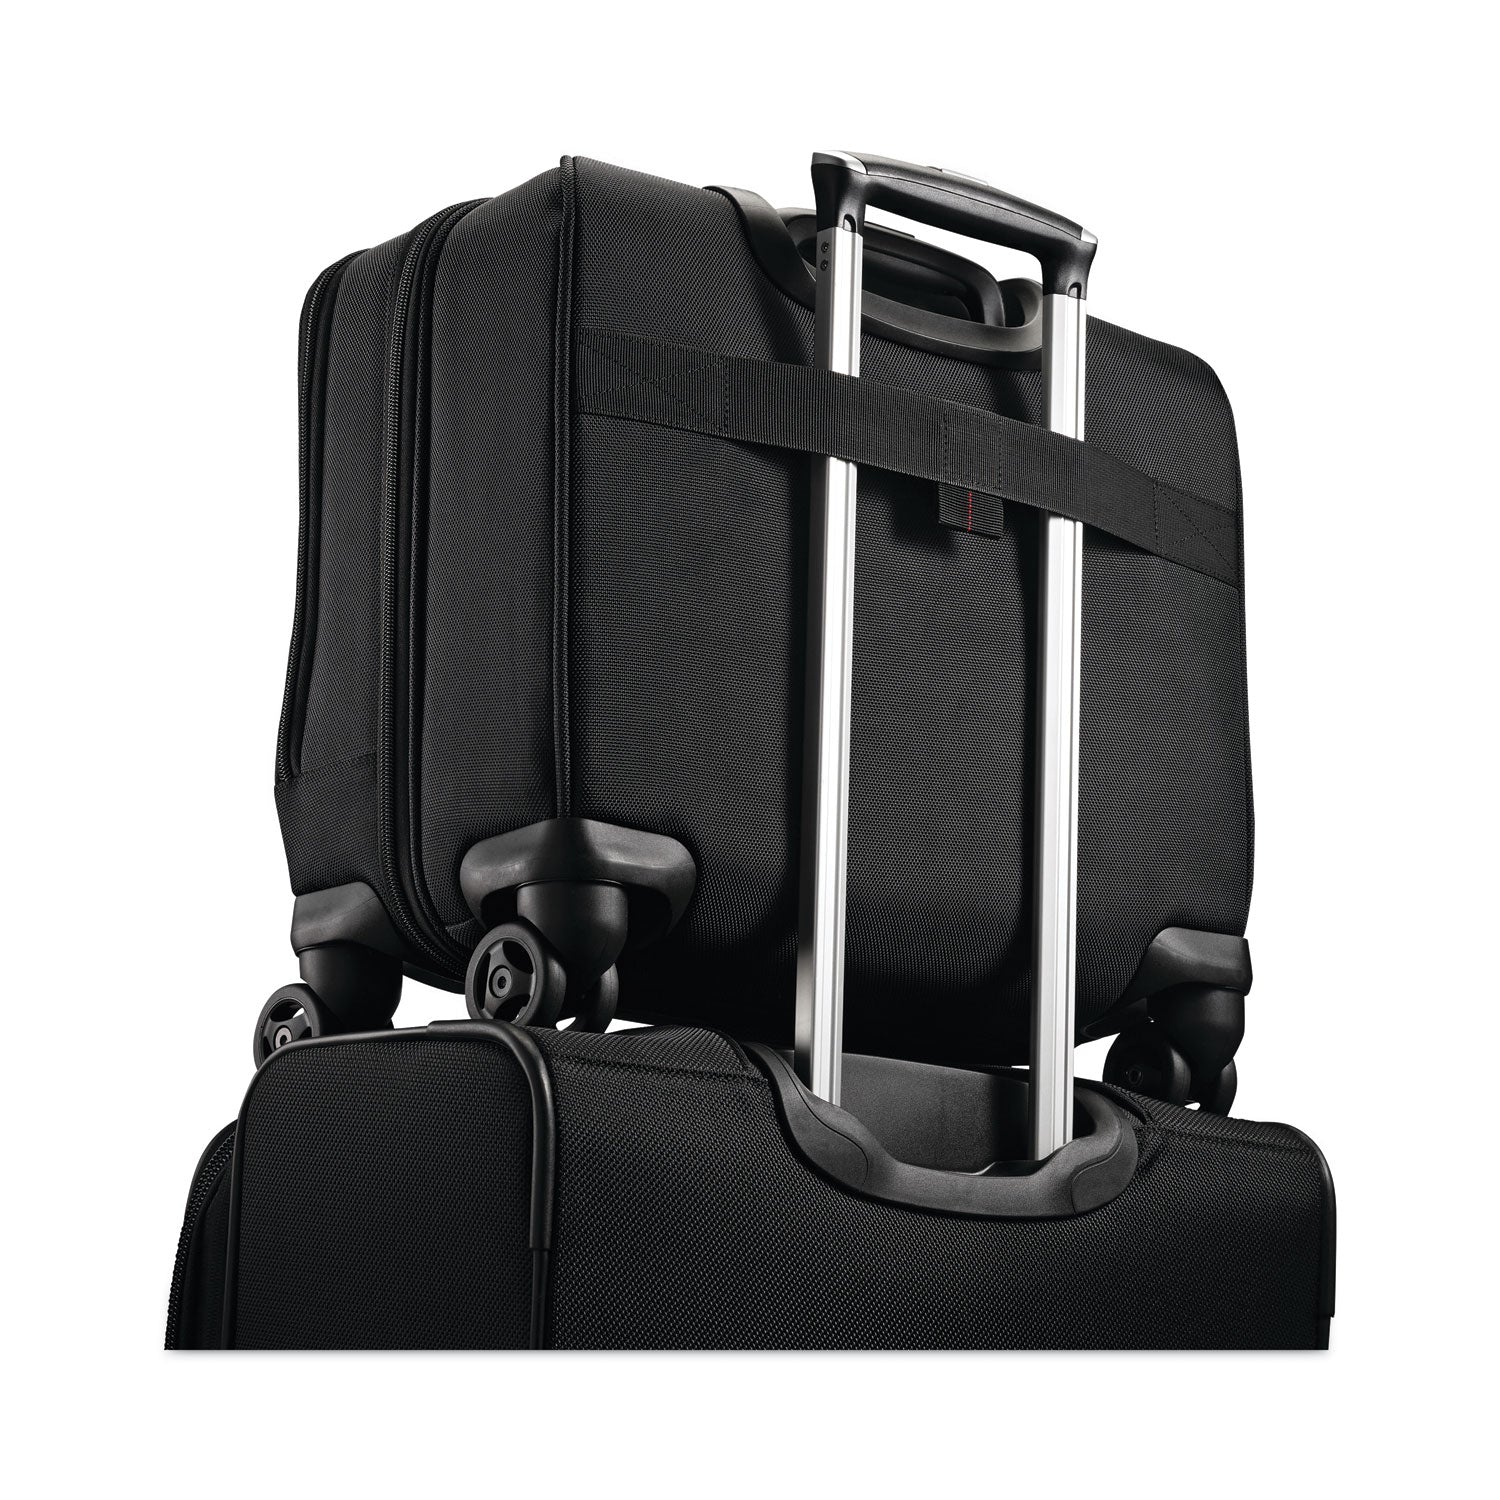 xenon-3-spinner-mobile-office-fits-devices-up-to-156-ballistic-polyester-1325-x-725-x-1625-black_sml894381041 - 3